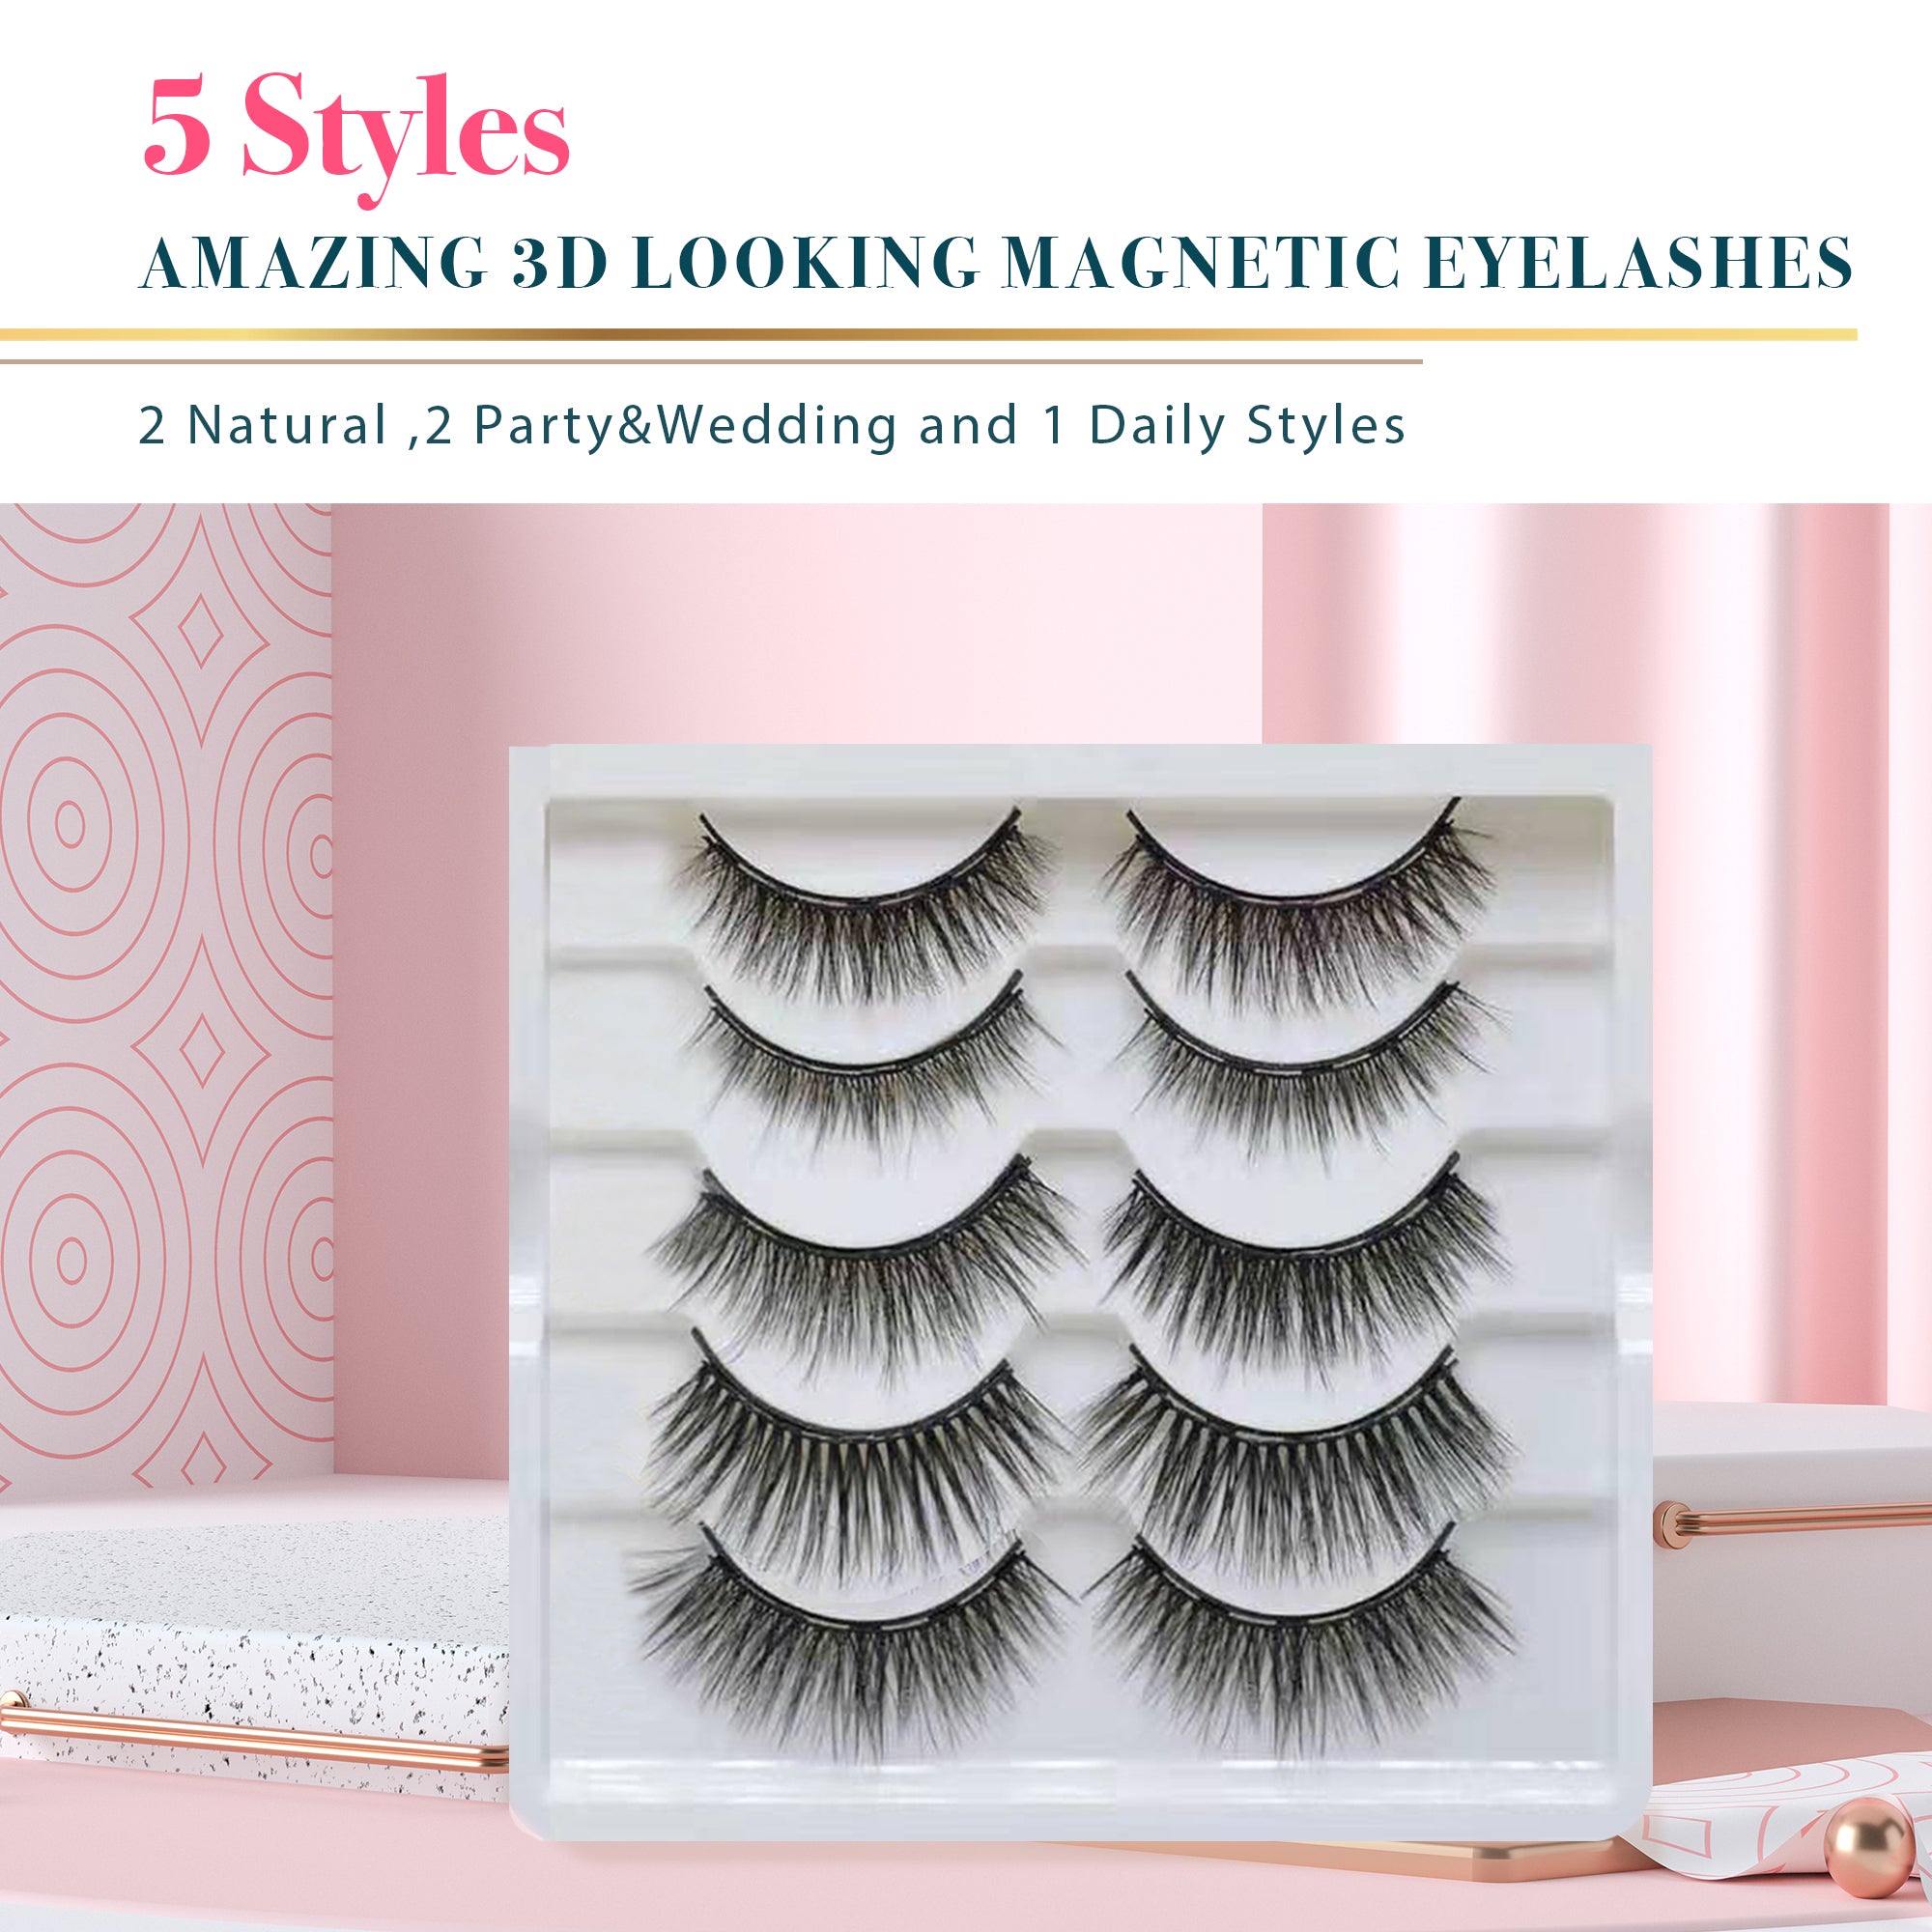 Arishine Natural Look 5 Different Pairs of False Magnetic Eyelashes Kit with Applicator